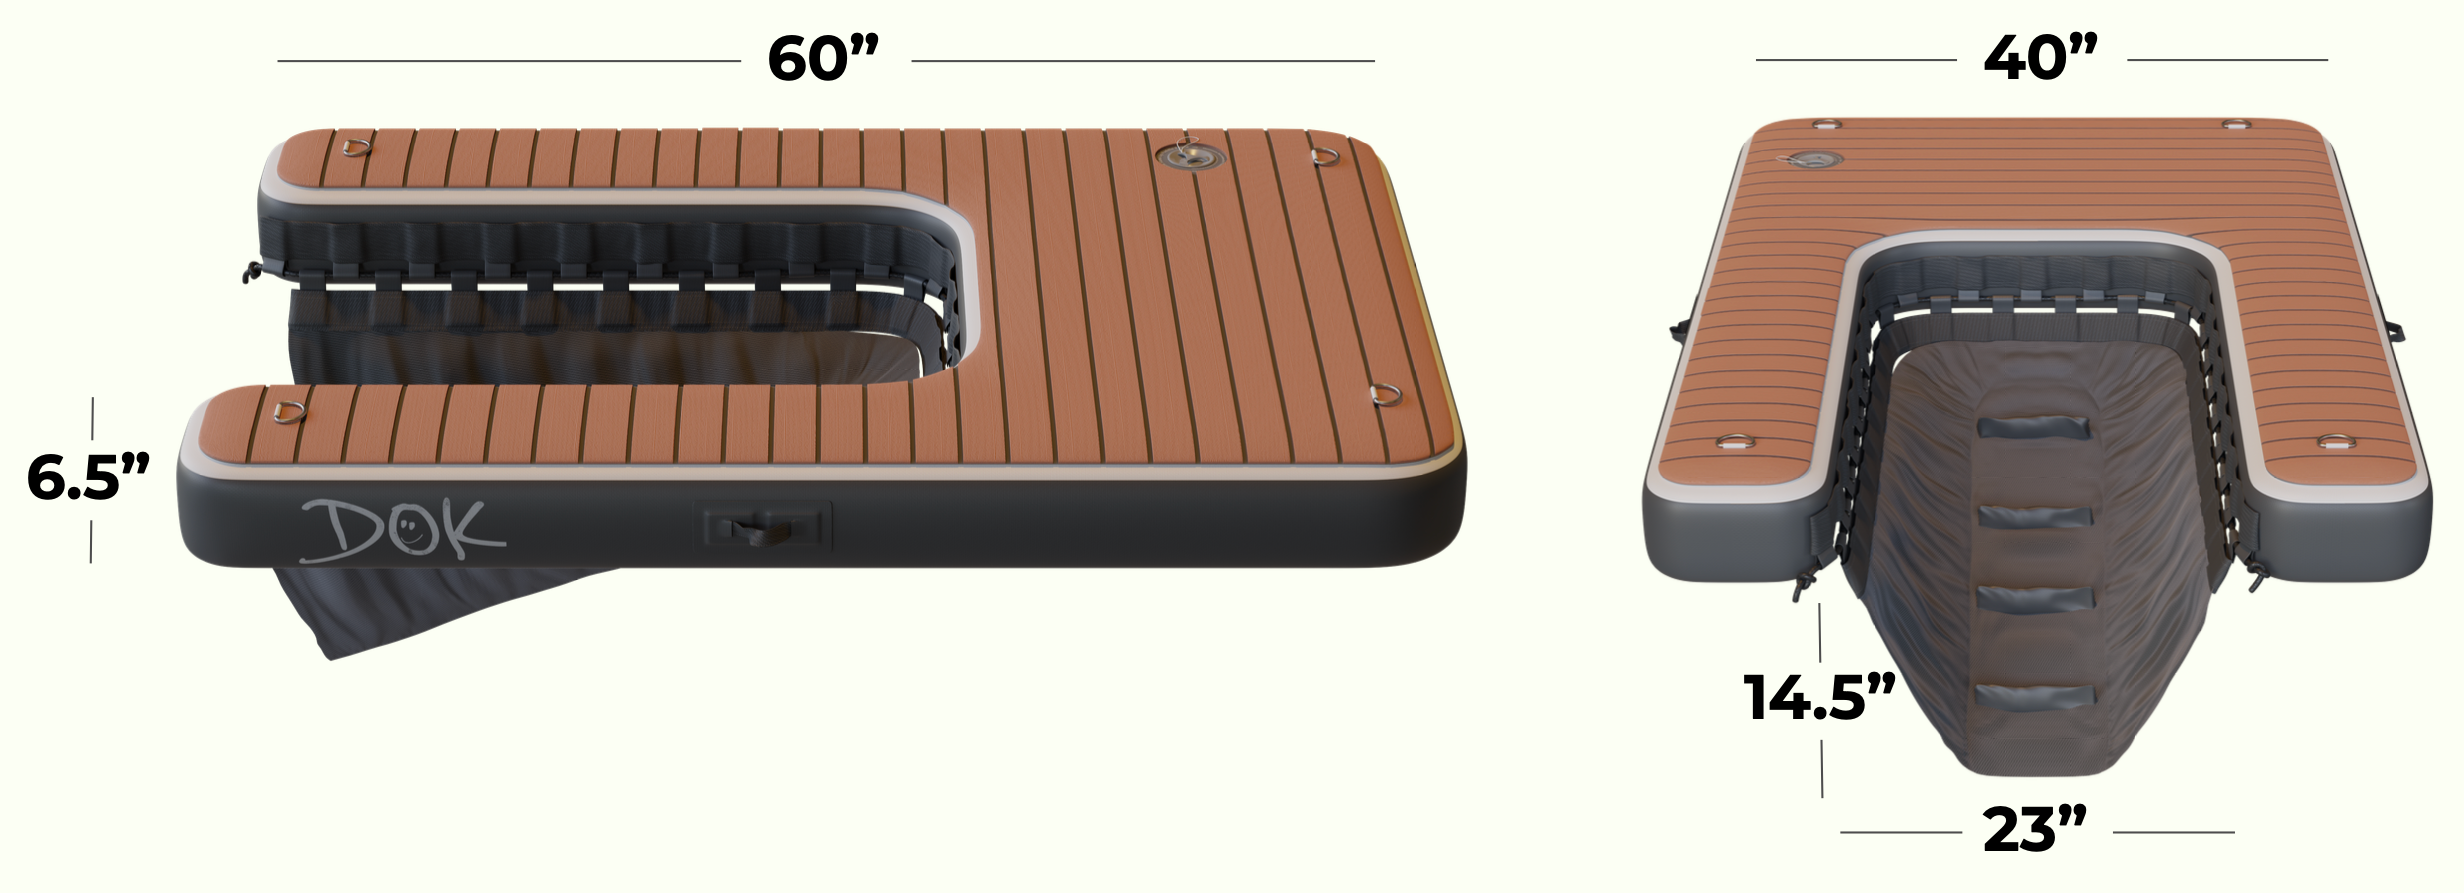 Dimensions of Dog Boat Ramp